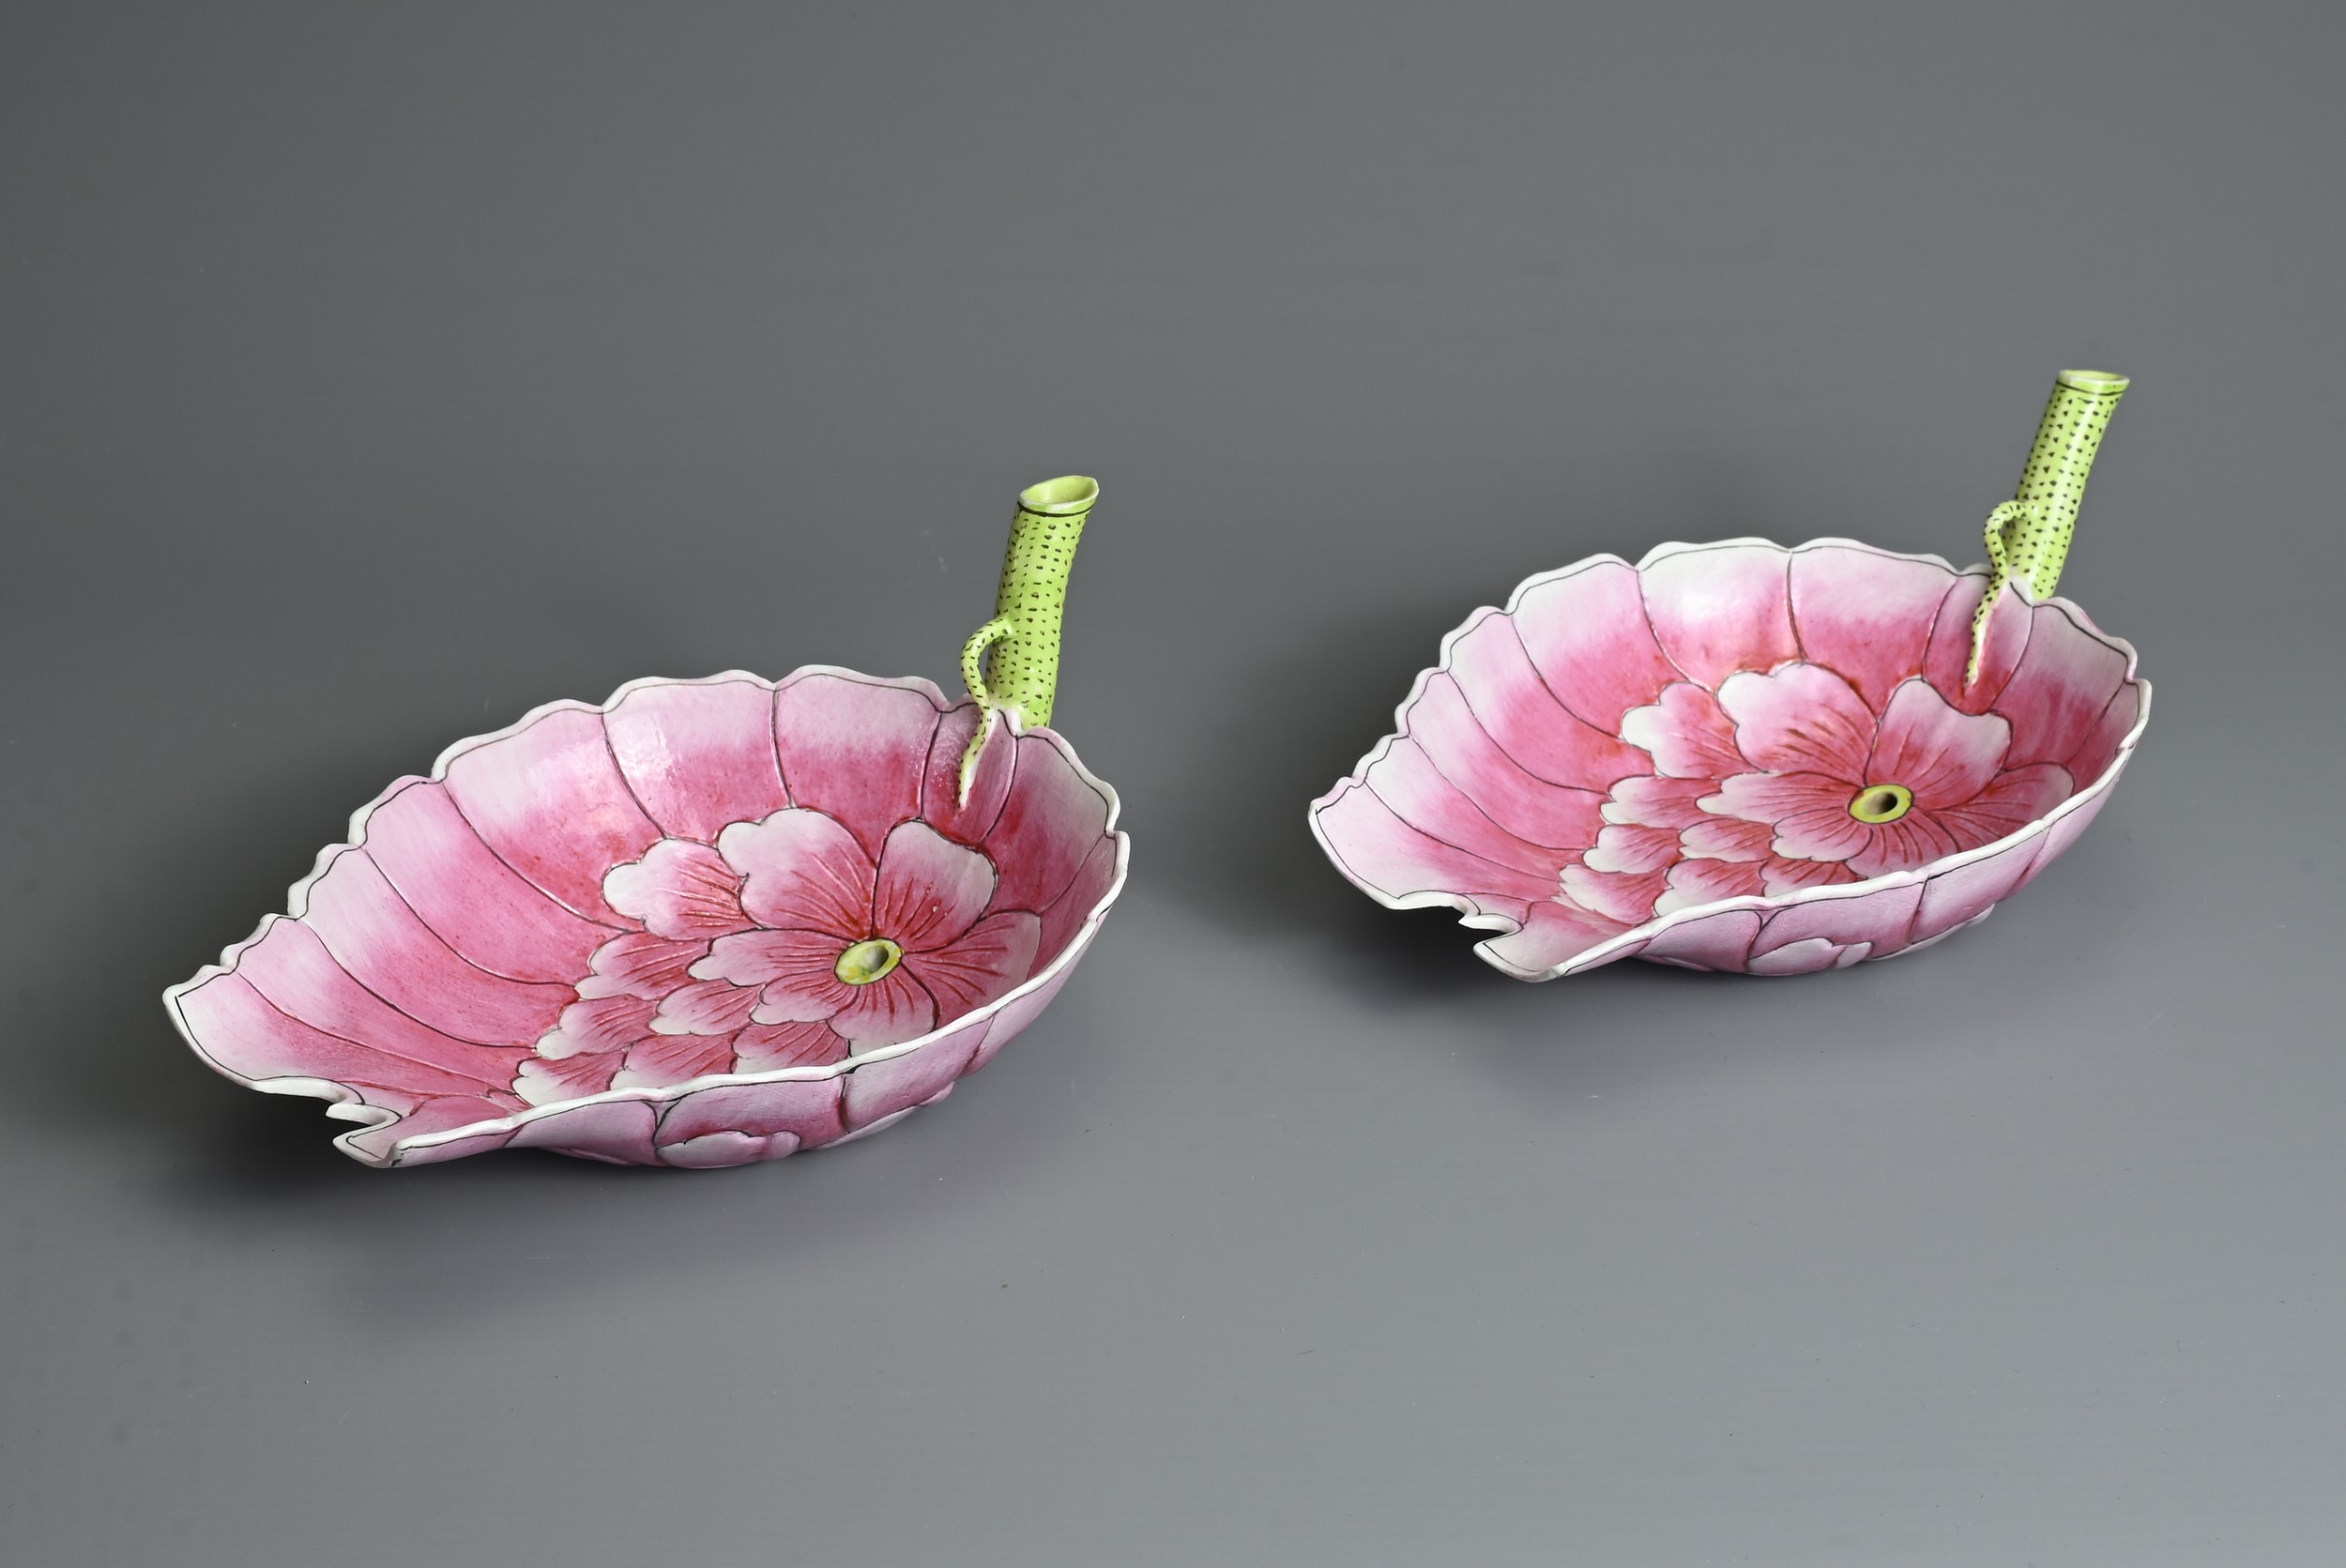 A PAIR OF CHINESE FAMILLE ROSE PORCELAIN LOTUS CUPS, GUANGXU MARK. Each cup in the form of a lotus